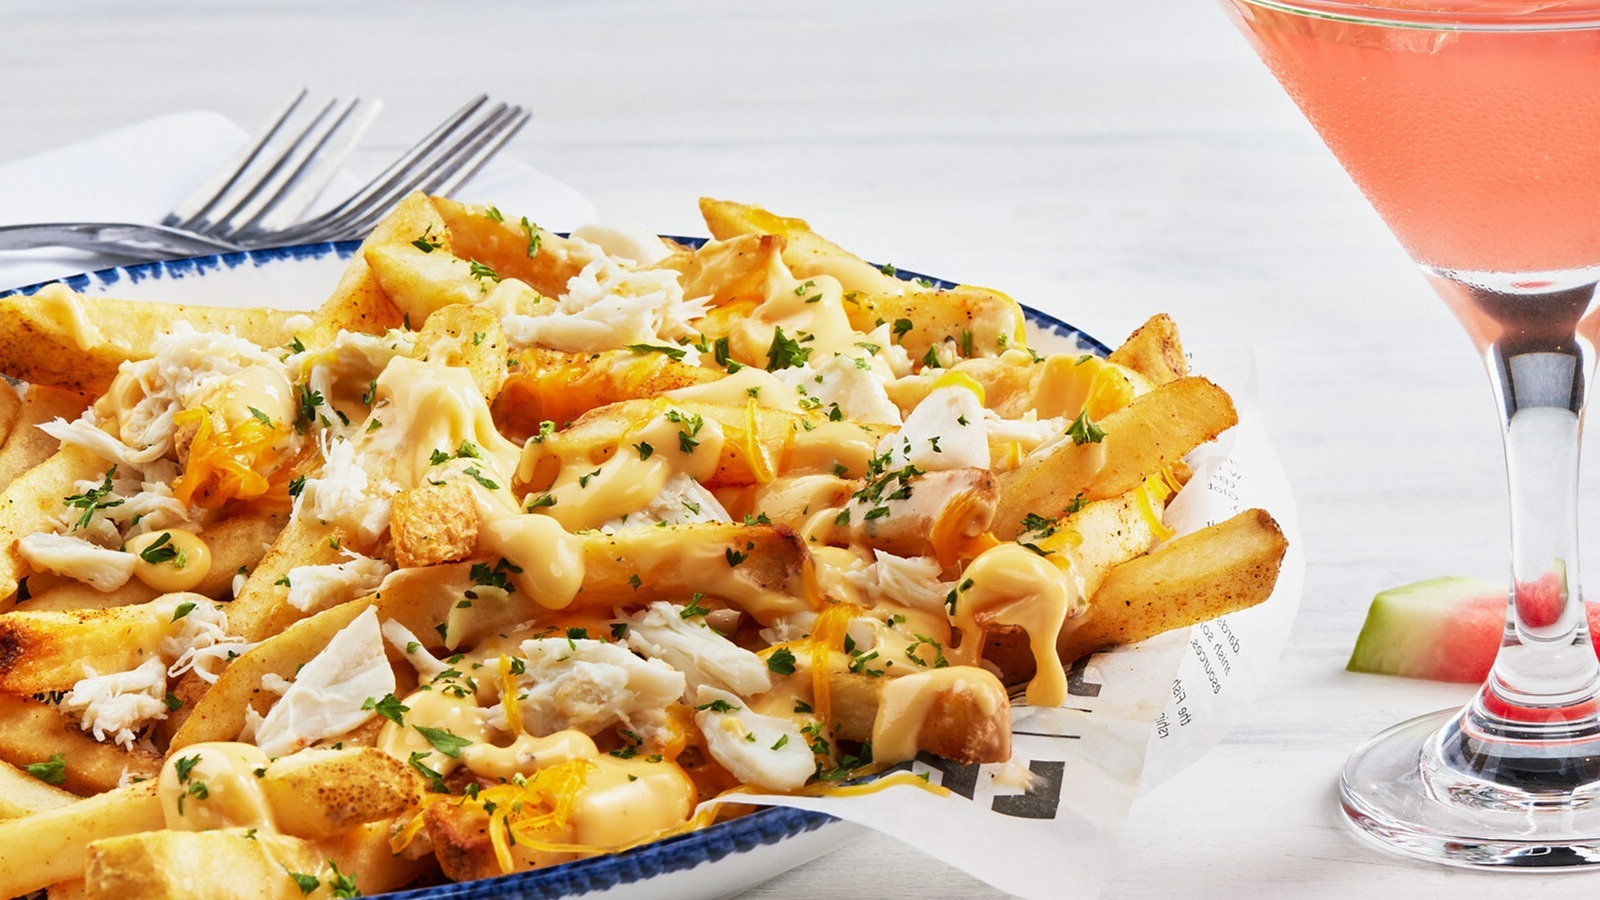 Red Lobster Introduces Crabby Cheese Fries For Crabfest